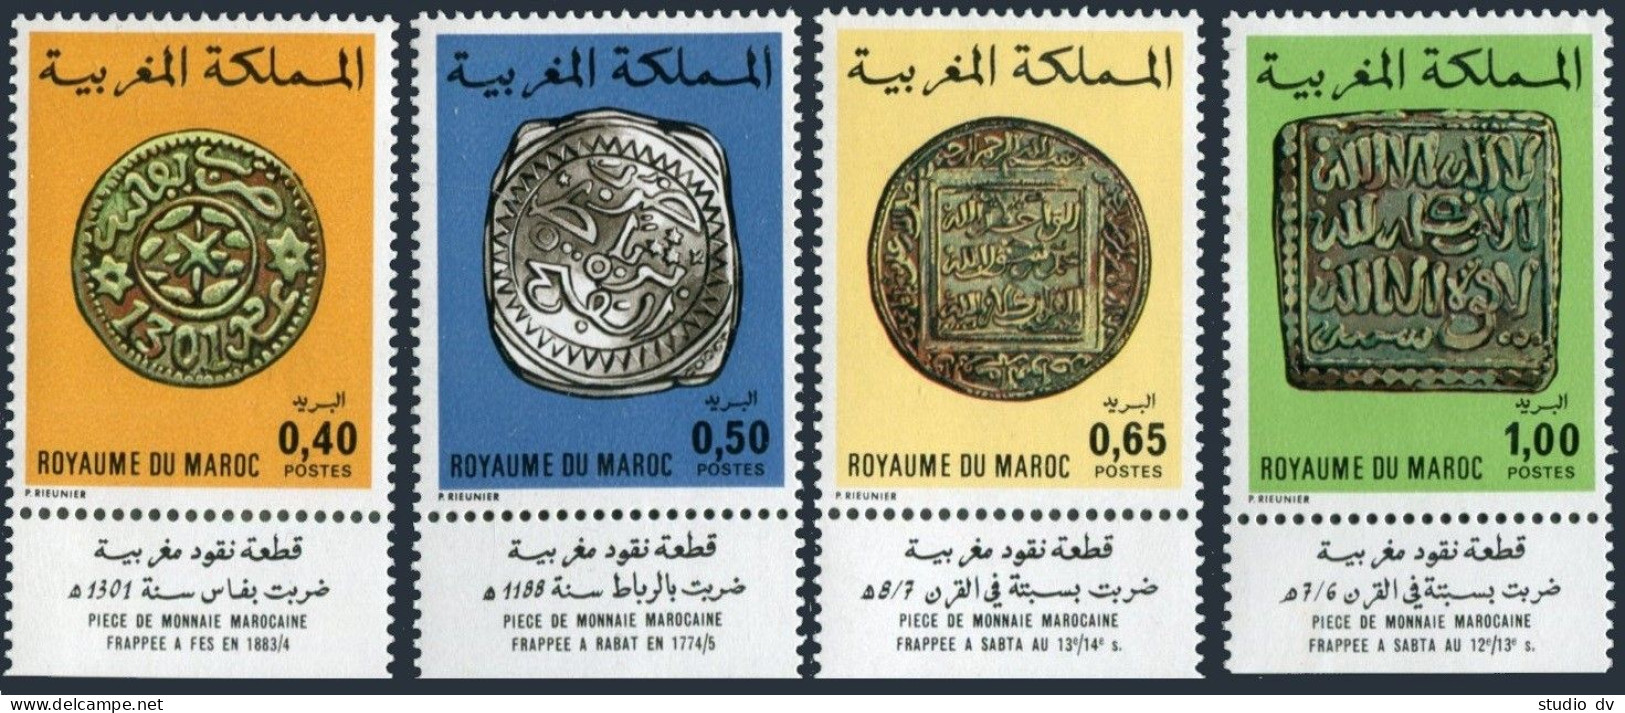 Morocco 357-360,MNH.Michel 824-827. Moroccan Coins,issued 01.20.1976. - Morocco (1956-...)